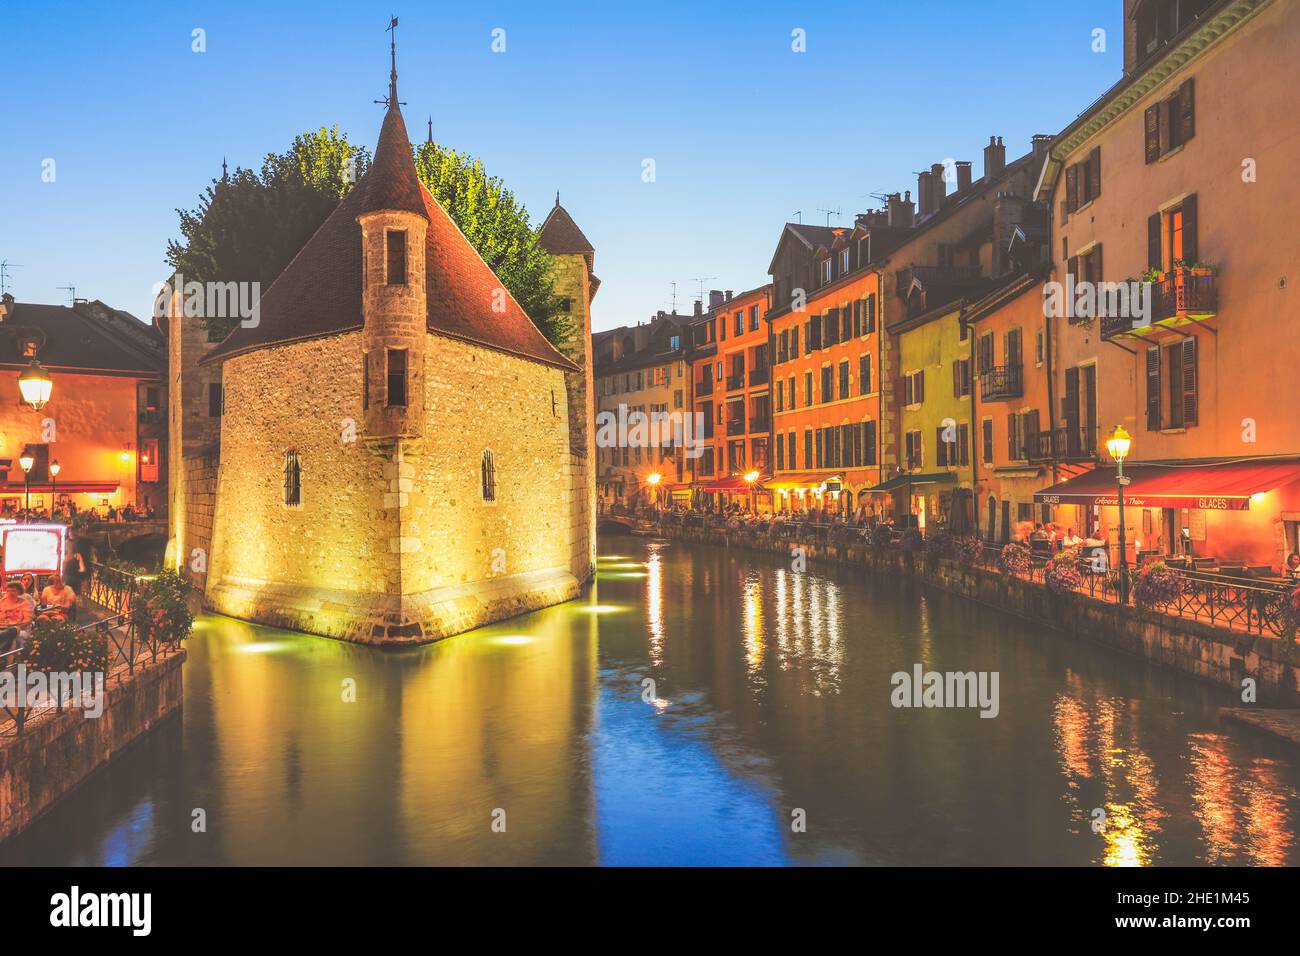 Palais de l'Isle, popular landmark in Annecy, the capital of Savoy, called Venice of the Alps, France Stock Photo